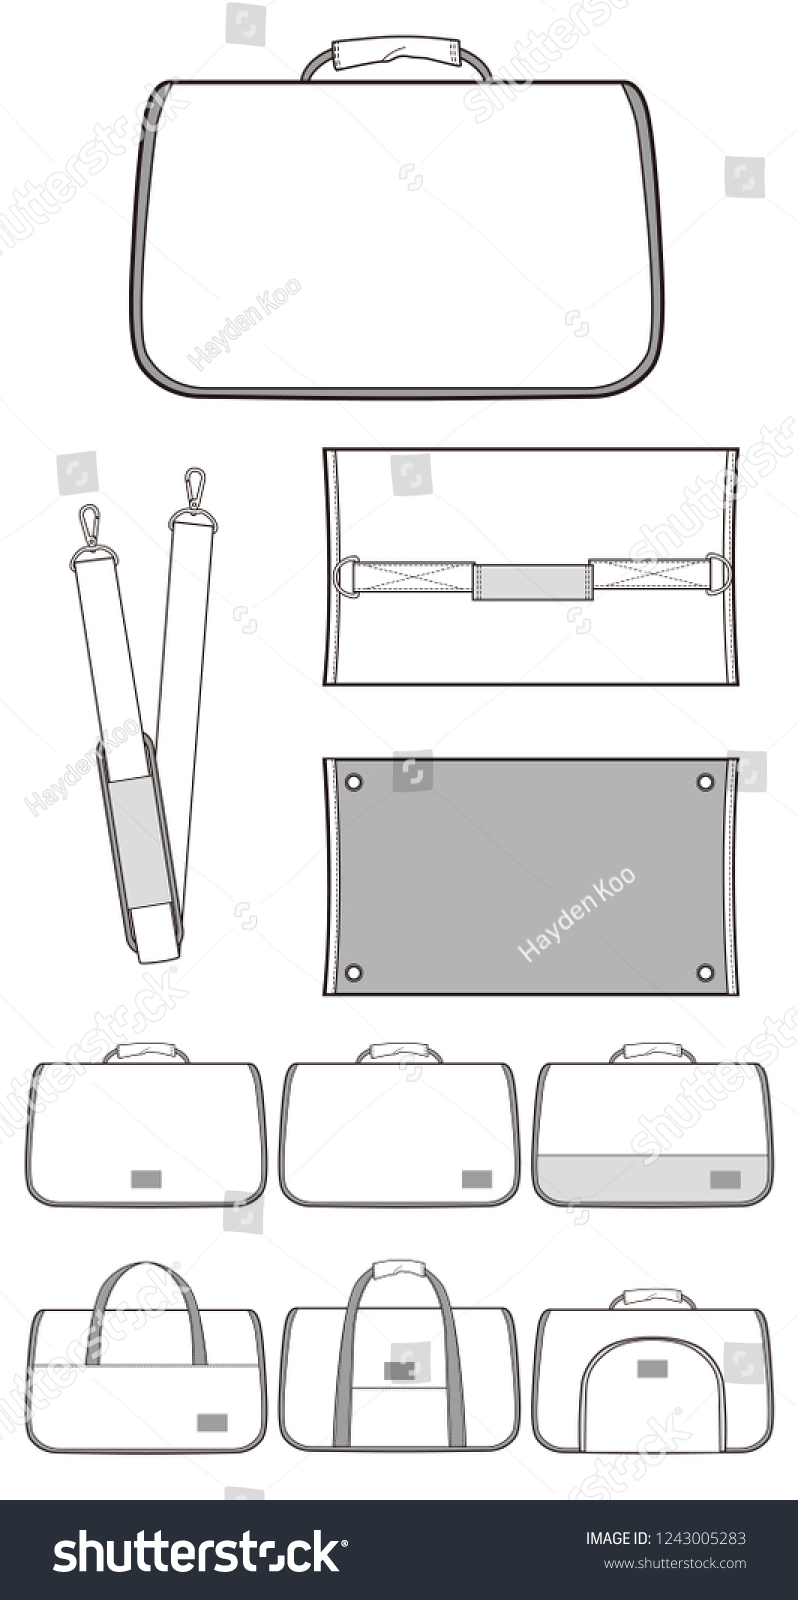 Pet Carrier Flat Technical Drawing Template Stock Vector (Royalty Free ...